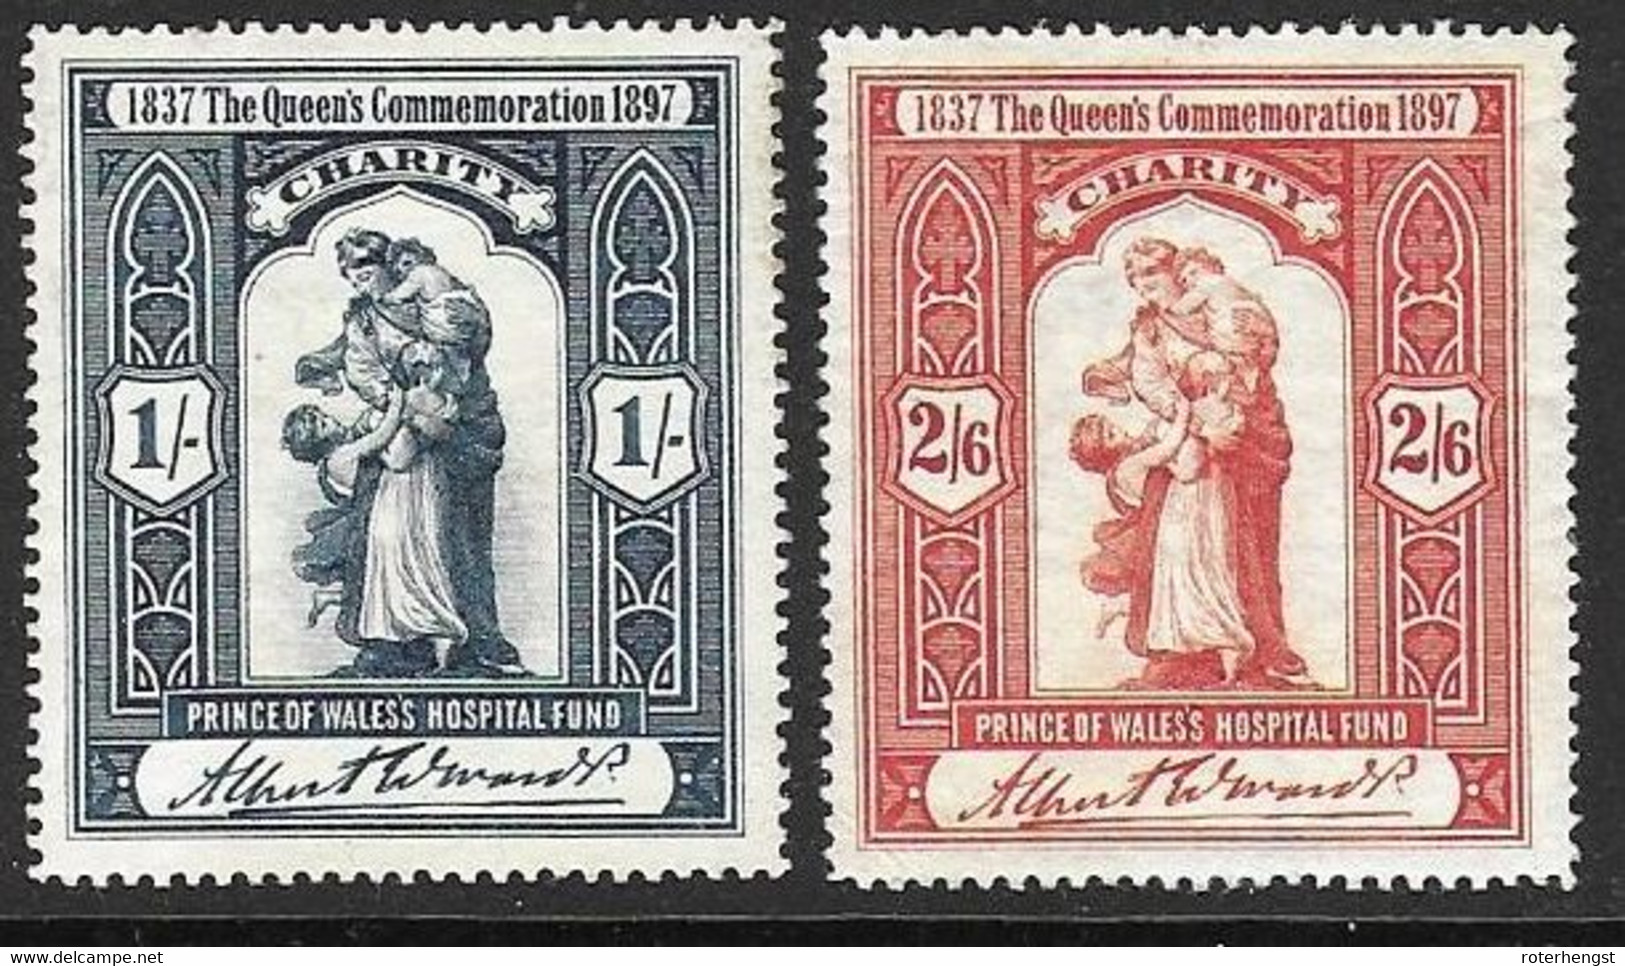 Queens Commemoration 1897 Mh * Charity Stamps - Nuovi